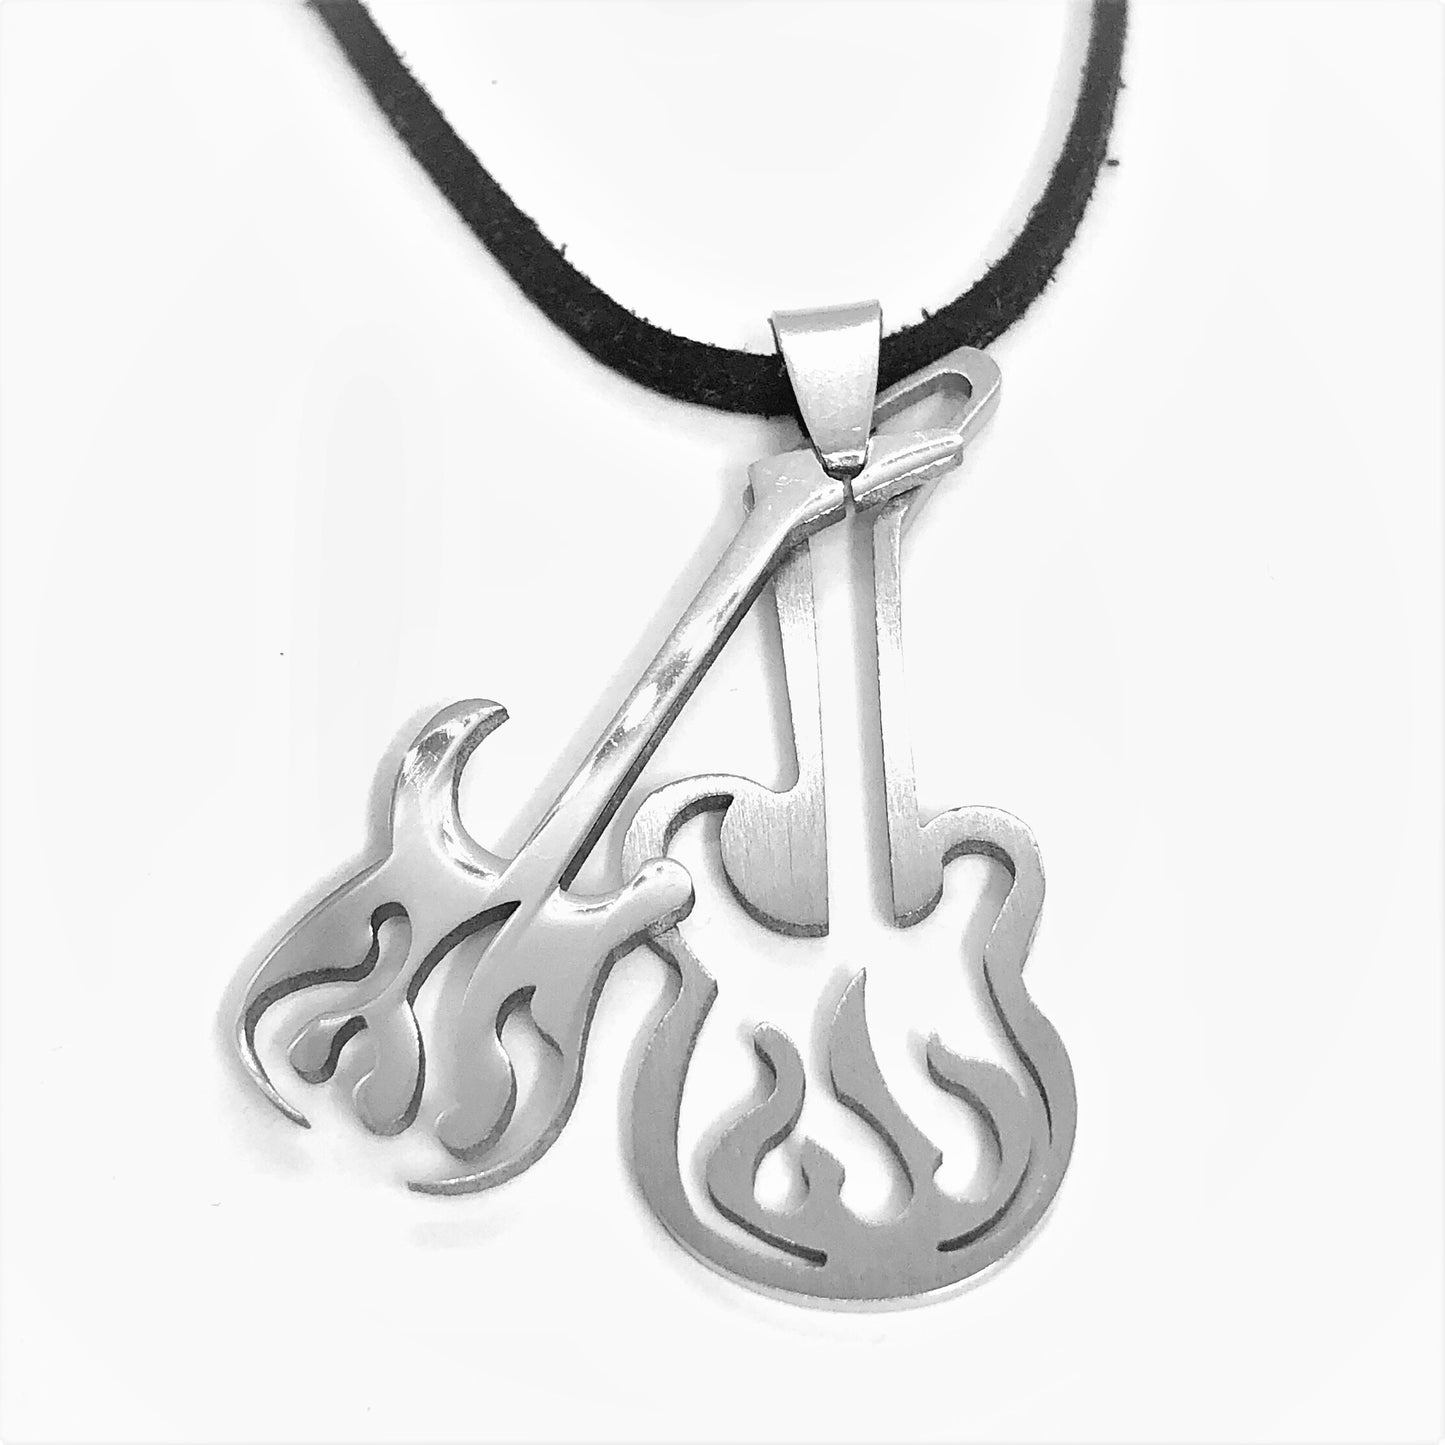 Cut Out Guitar Two piece  Stainless Steel  Pendant